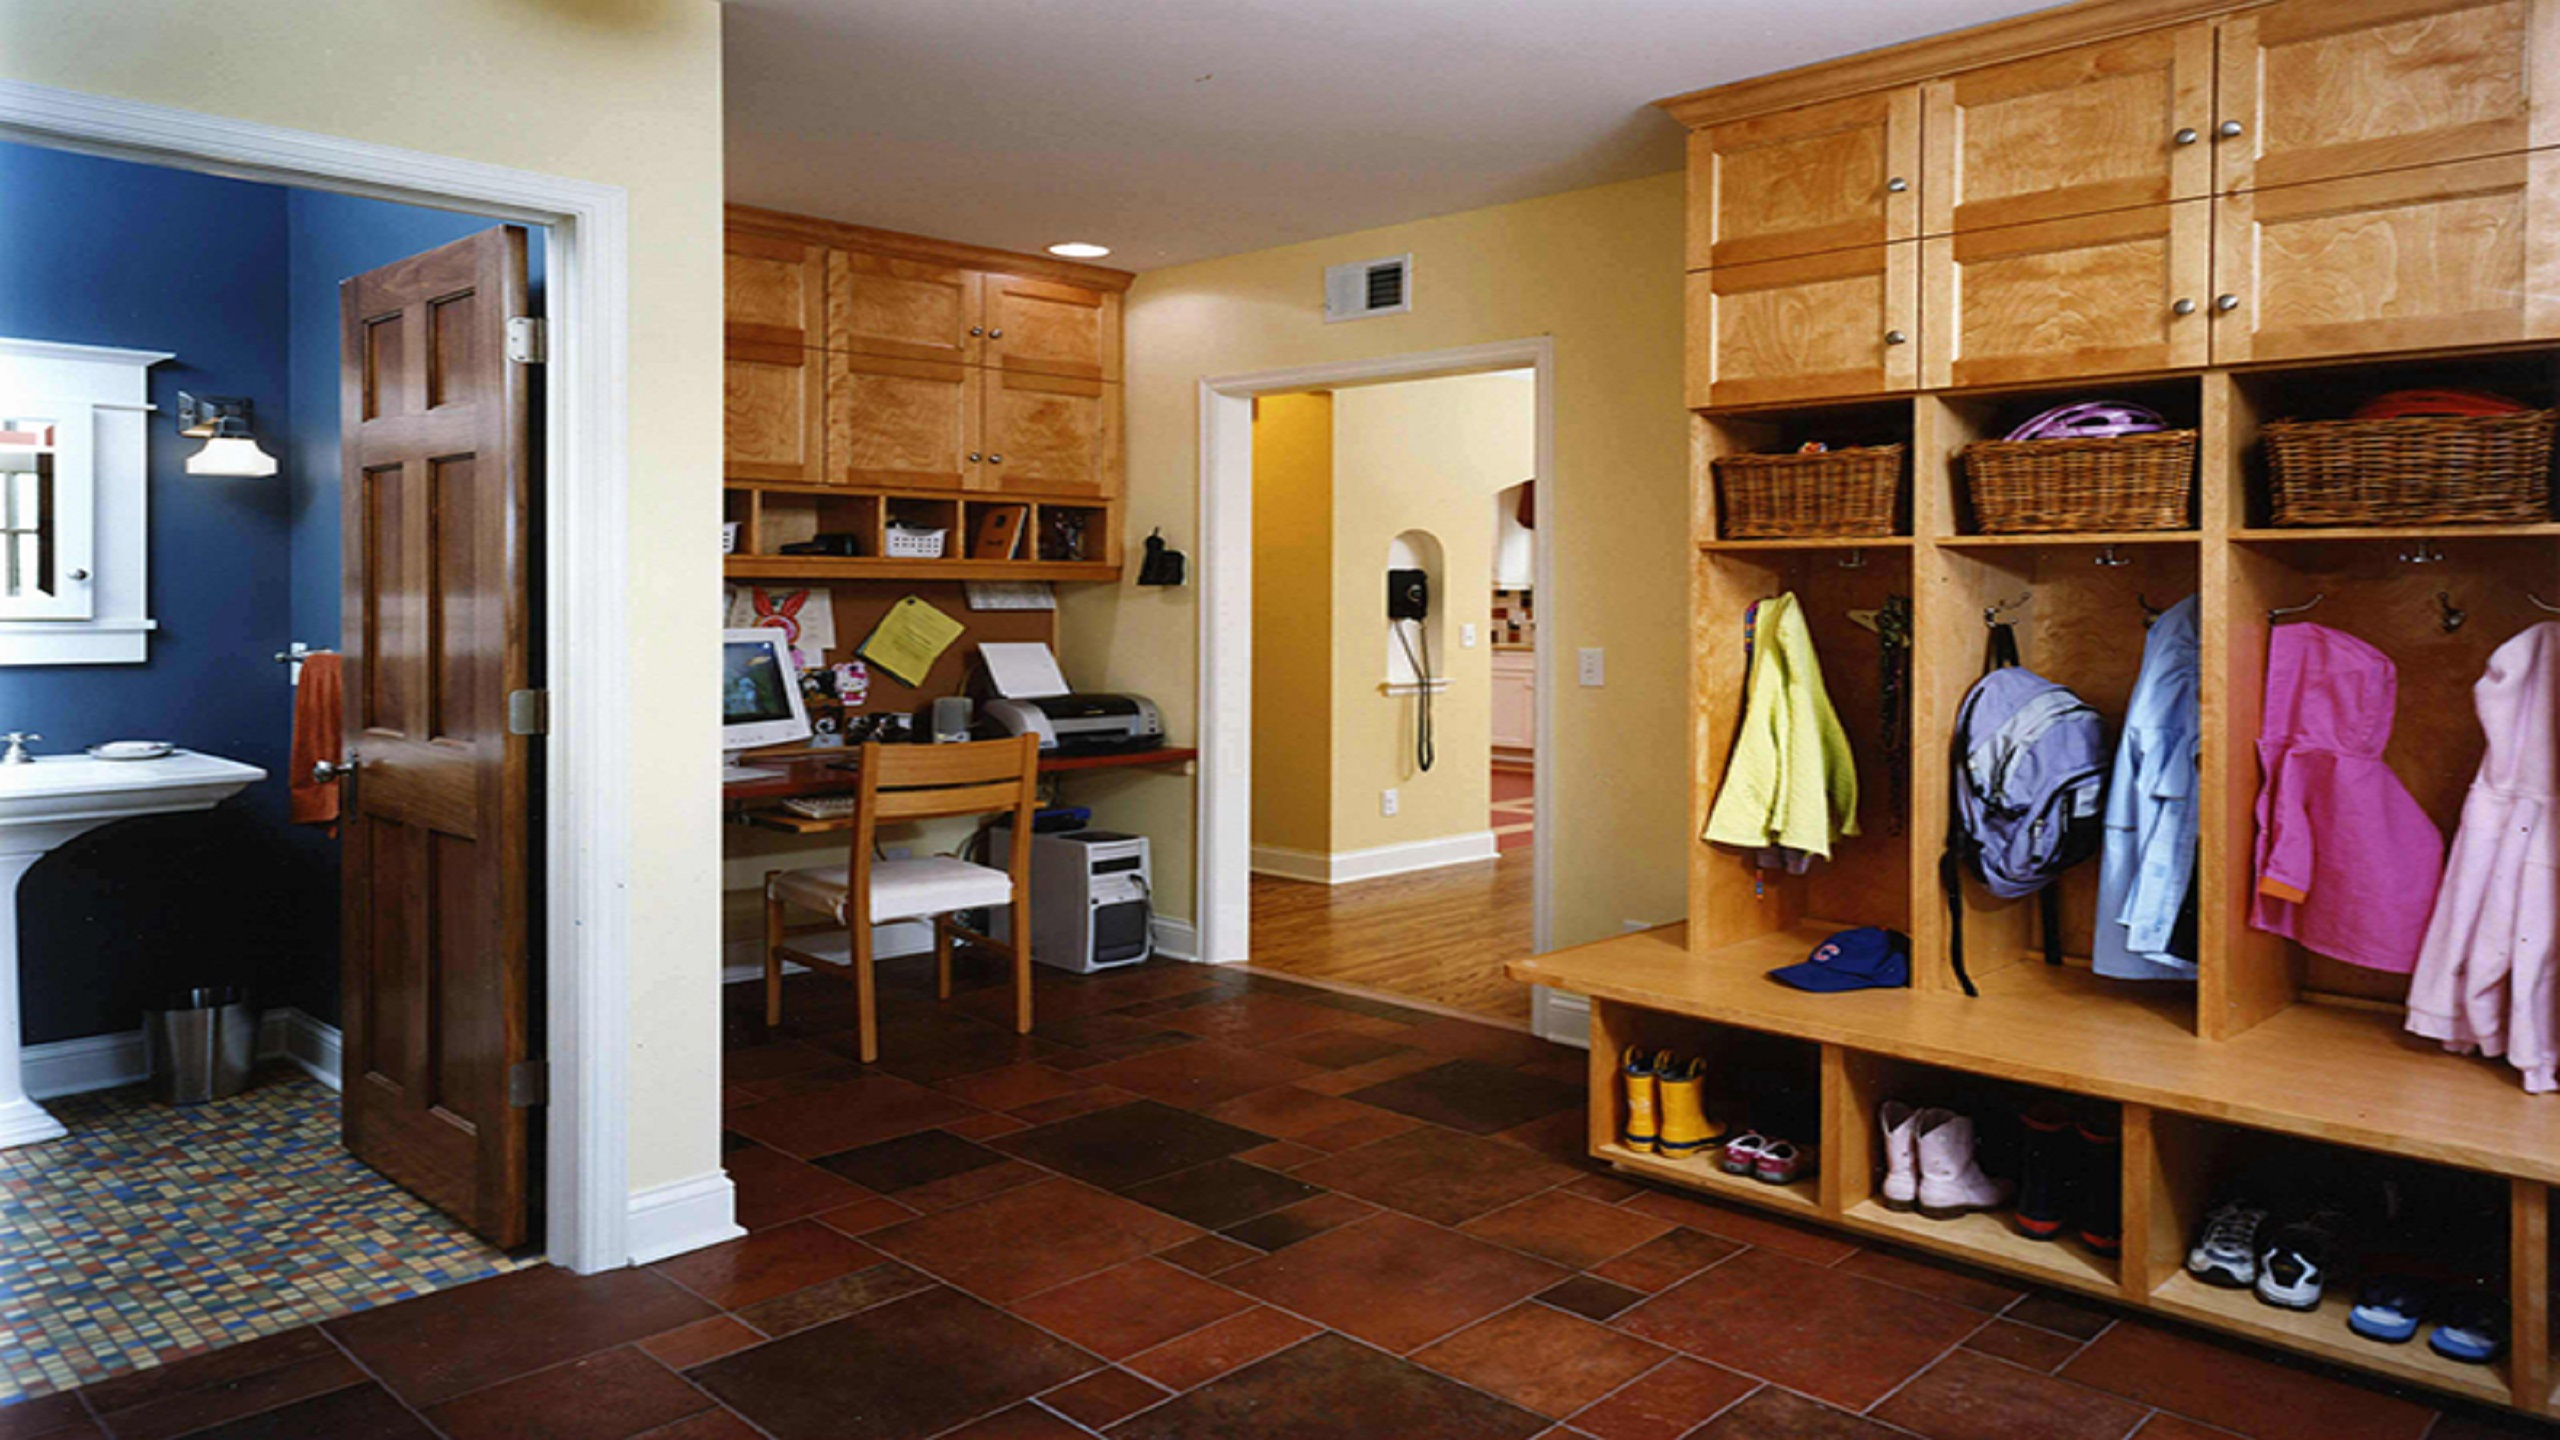 Entryway of a home with wooden cabinet storage cubbies filled with jackets and backpacks